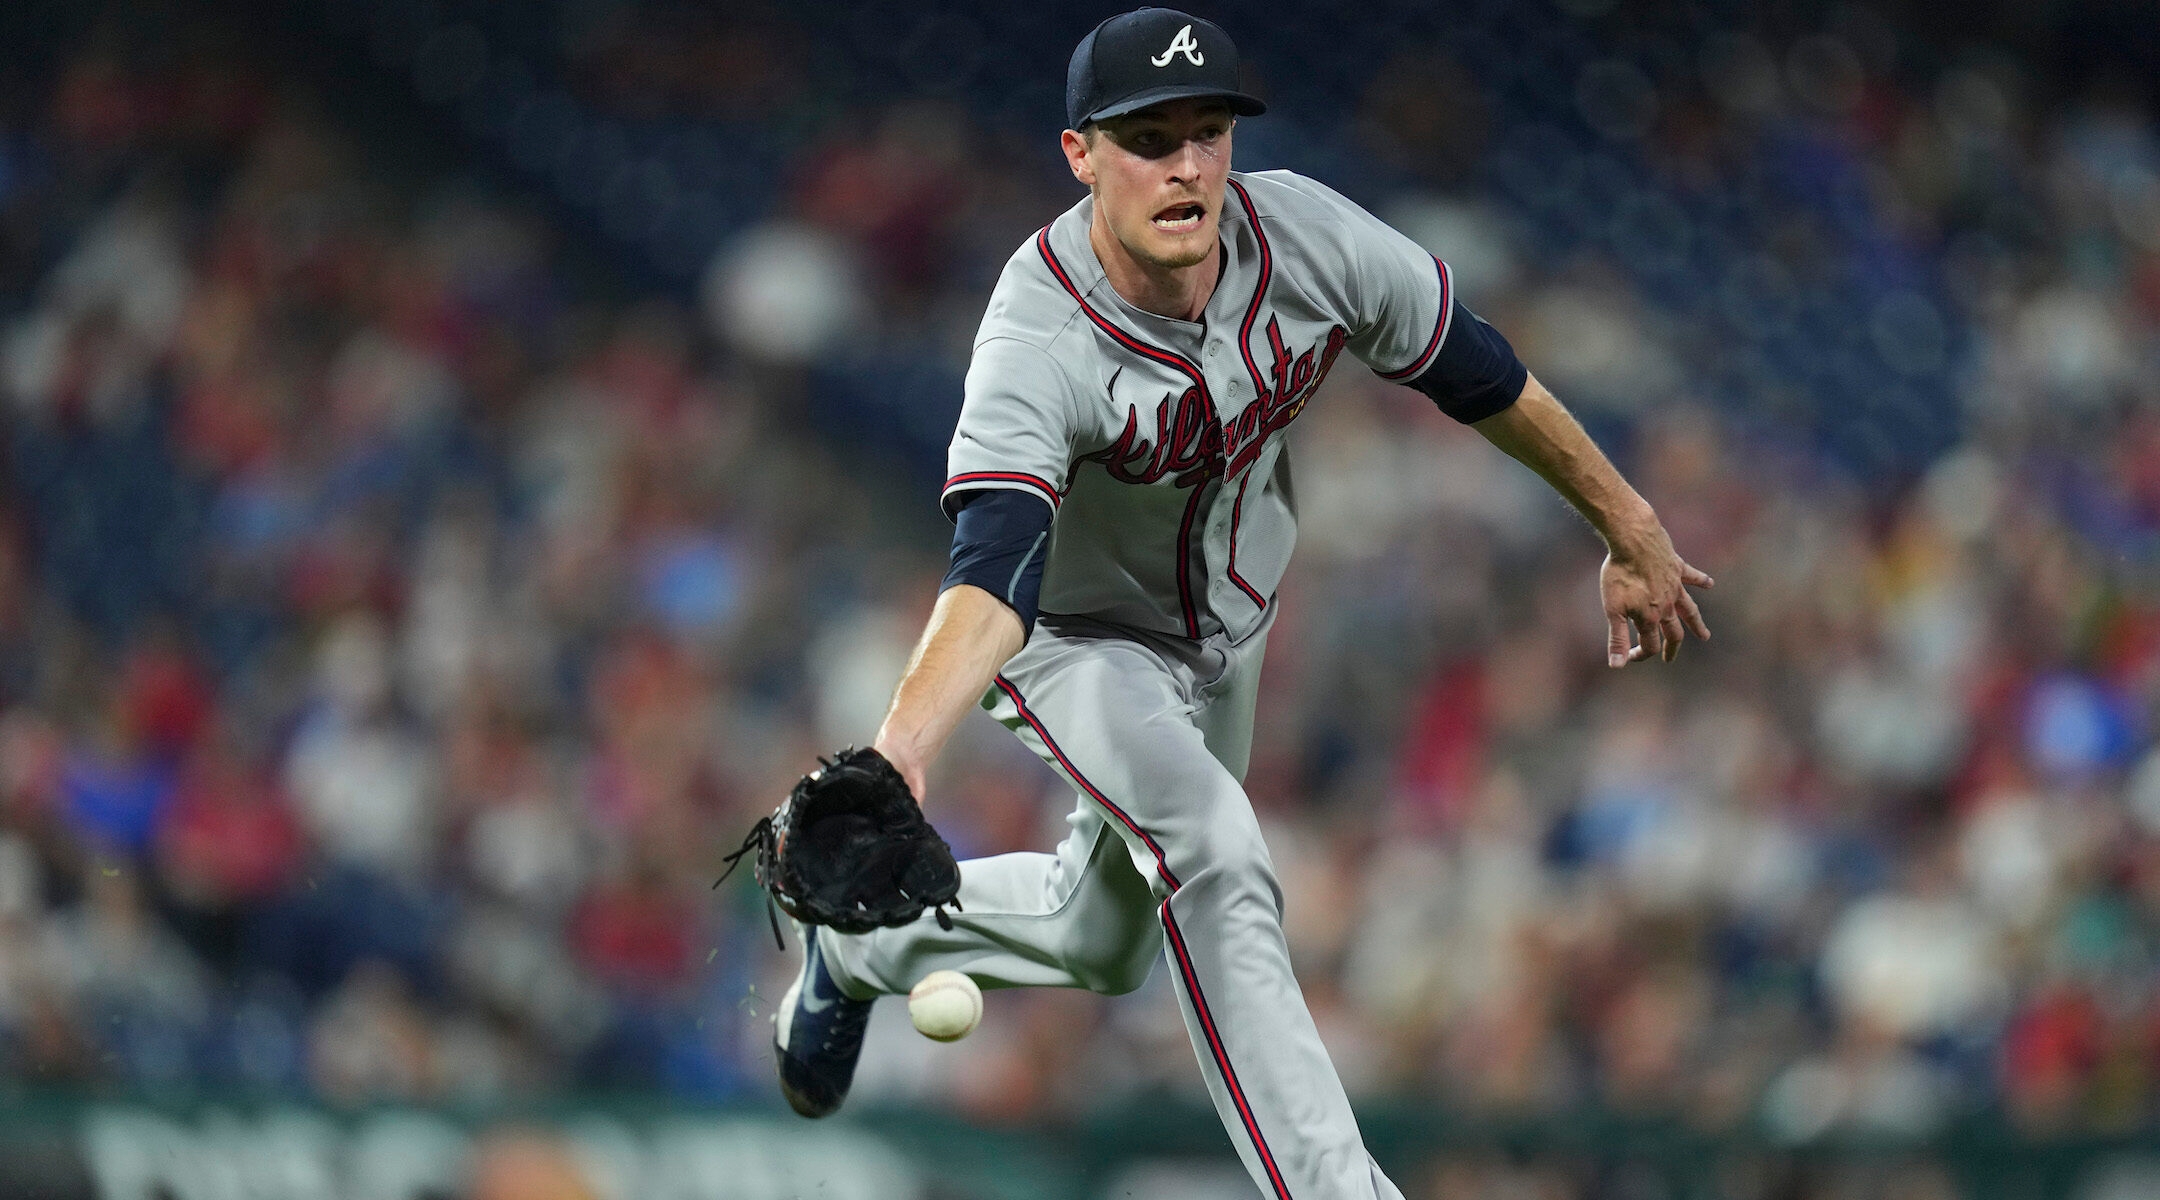 Jewish ace Max Fried wins 3rd straight Gold Glove award for best defensive  pitcher - Jewish Telegraphic Agency